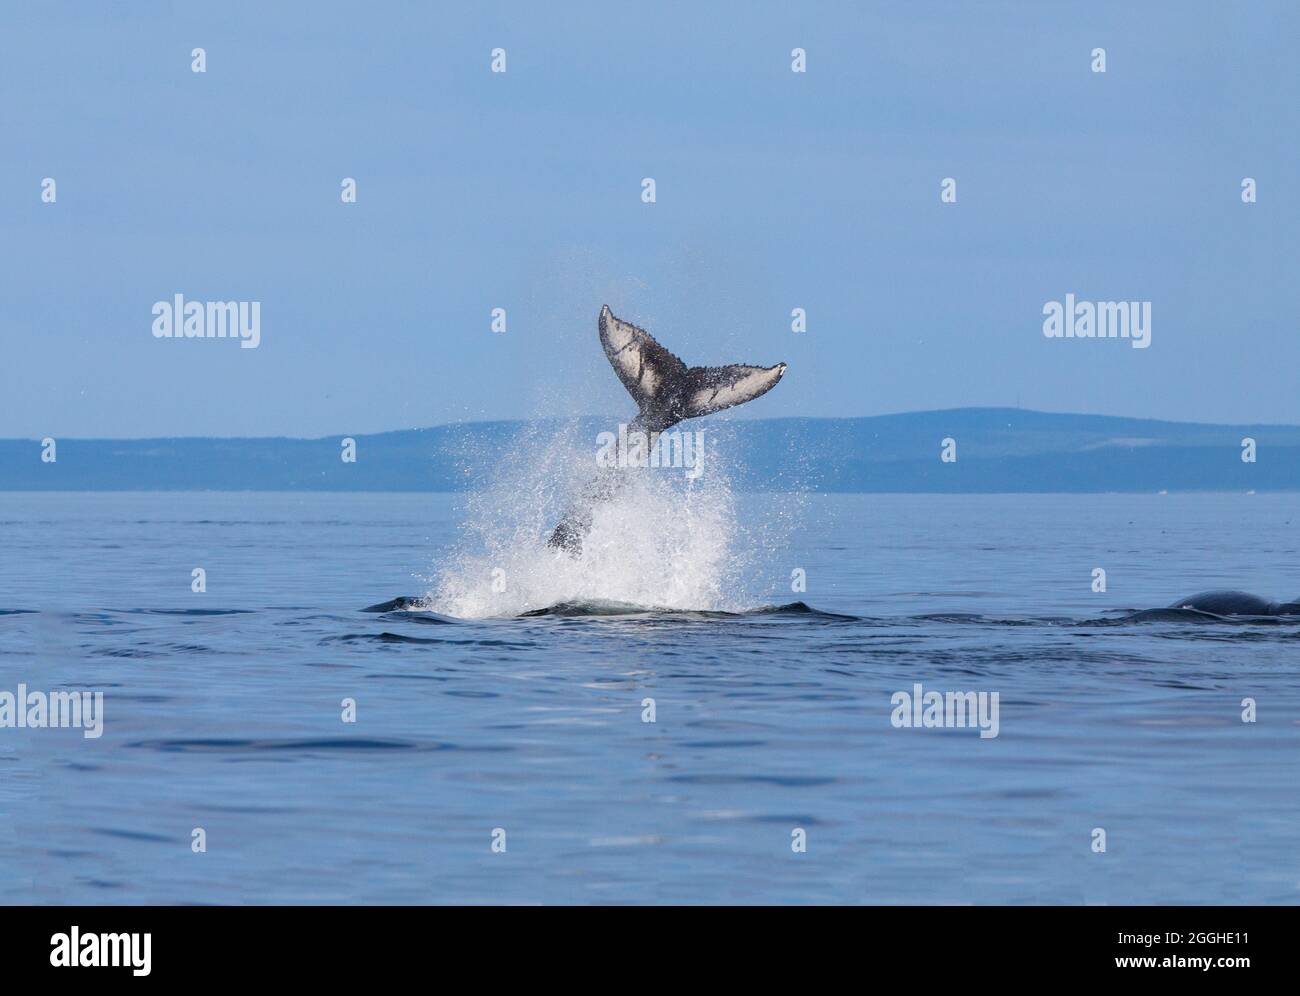 Whale watching on Saint Lawrence river in Tadoussac, Quebec, Canada Stock Photo